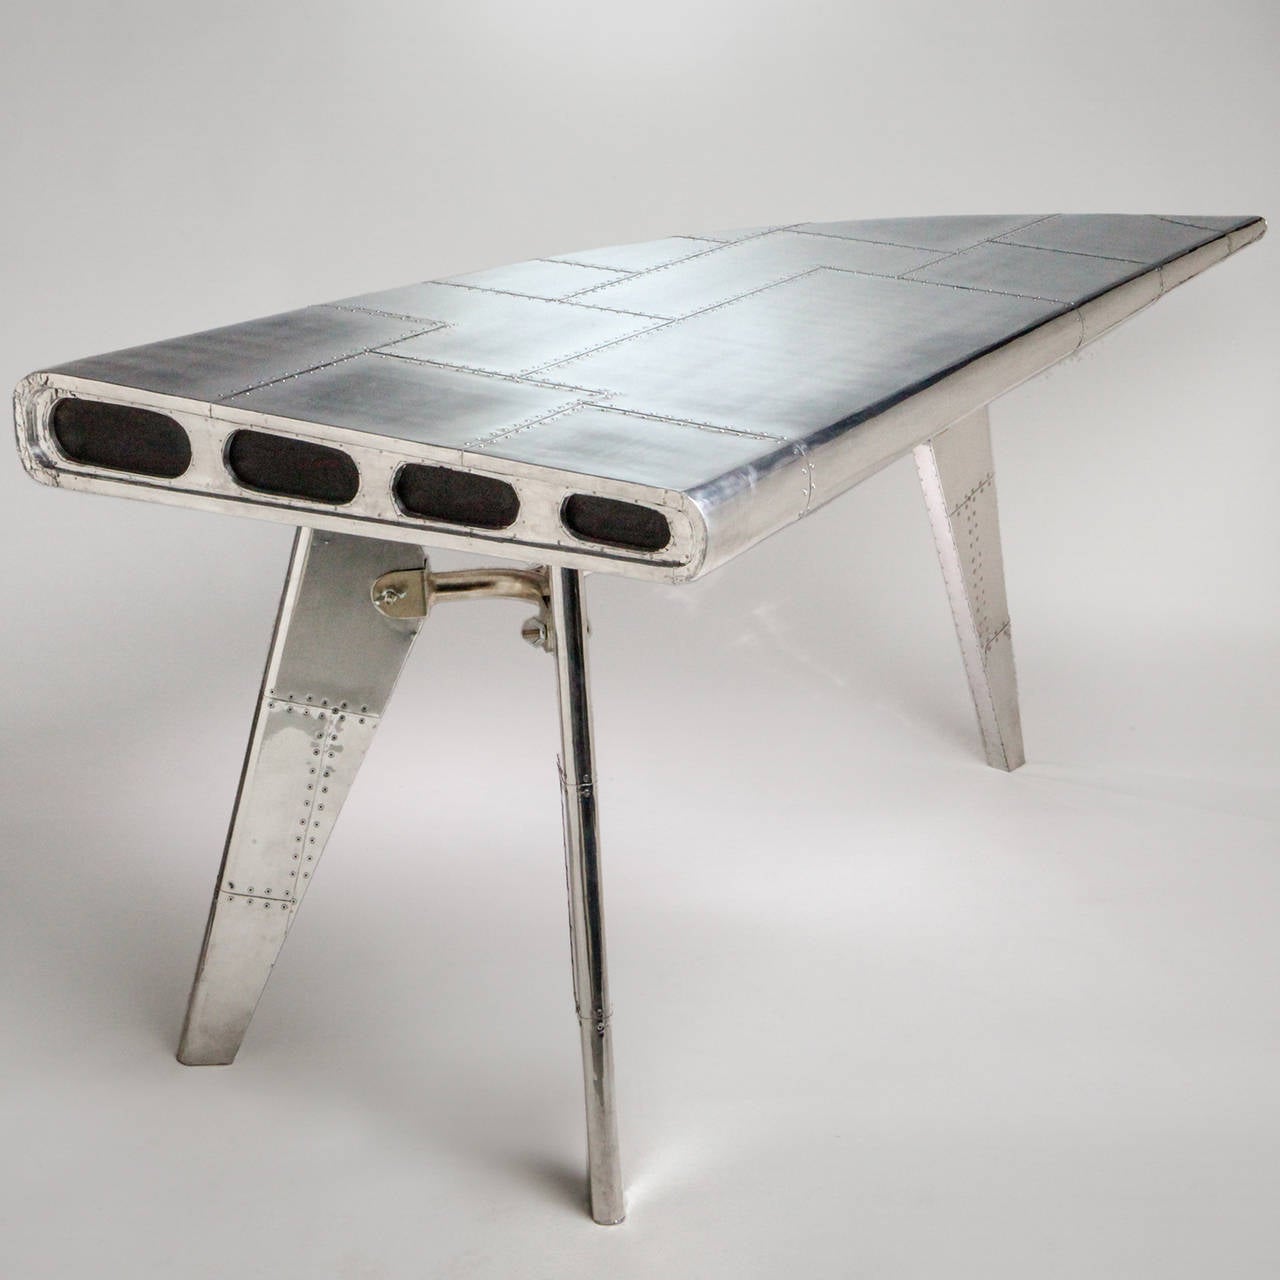 Unique 21st century desk designed as the extended piece of an aluminum riveted airplane wing. On three metal strut shaped legs.